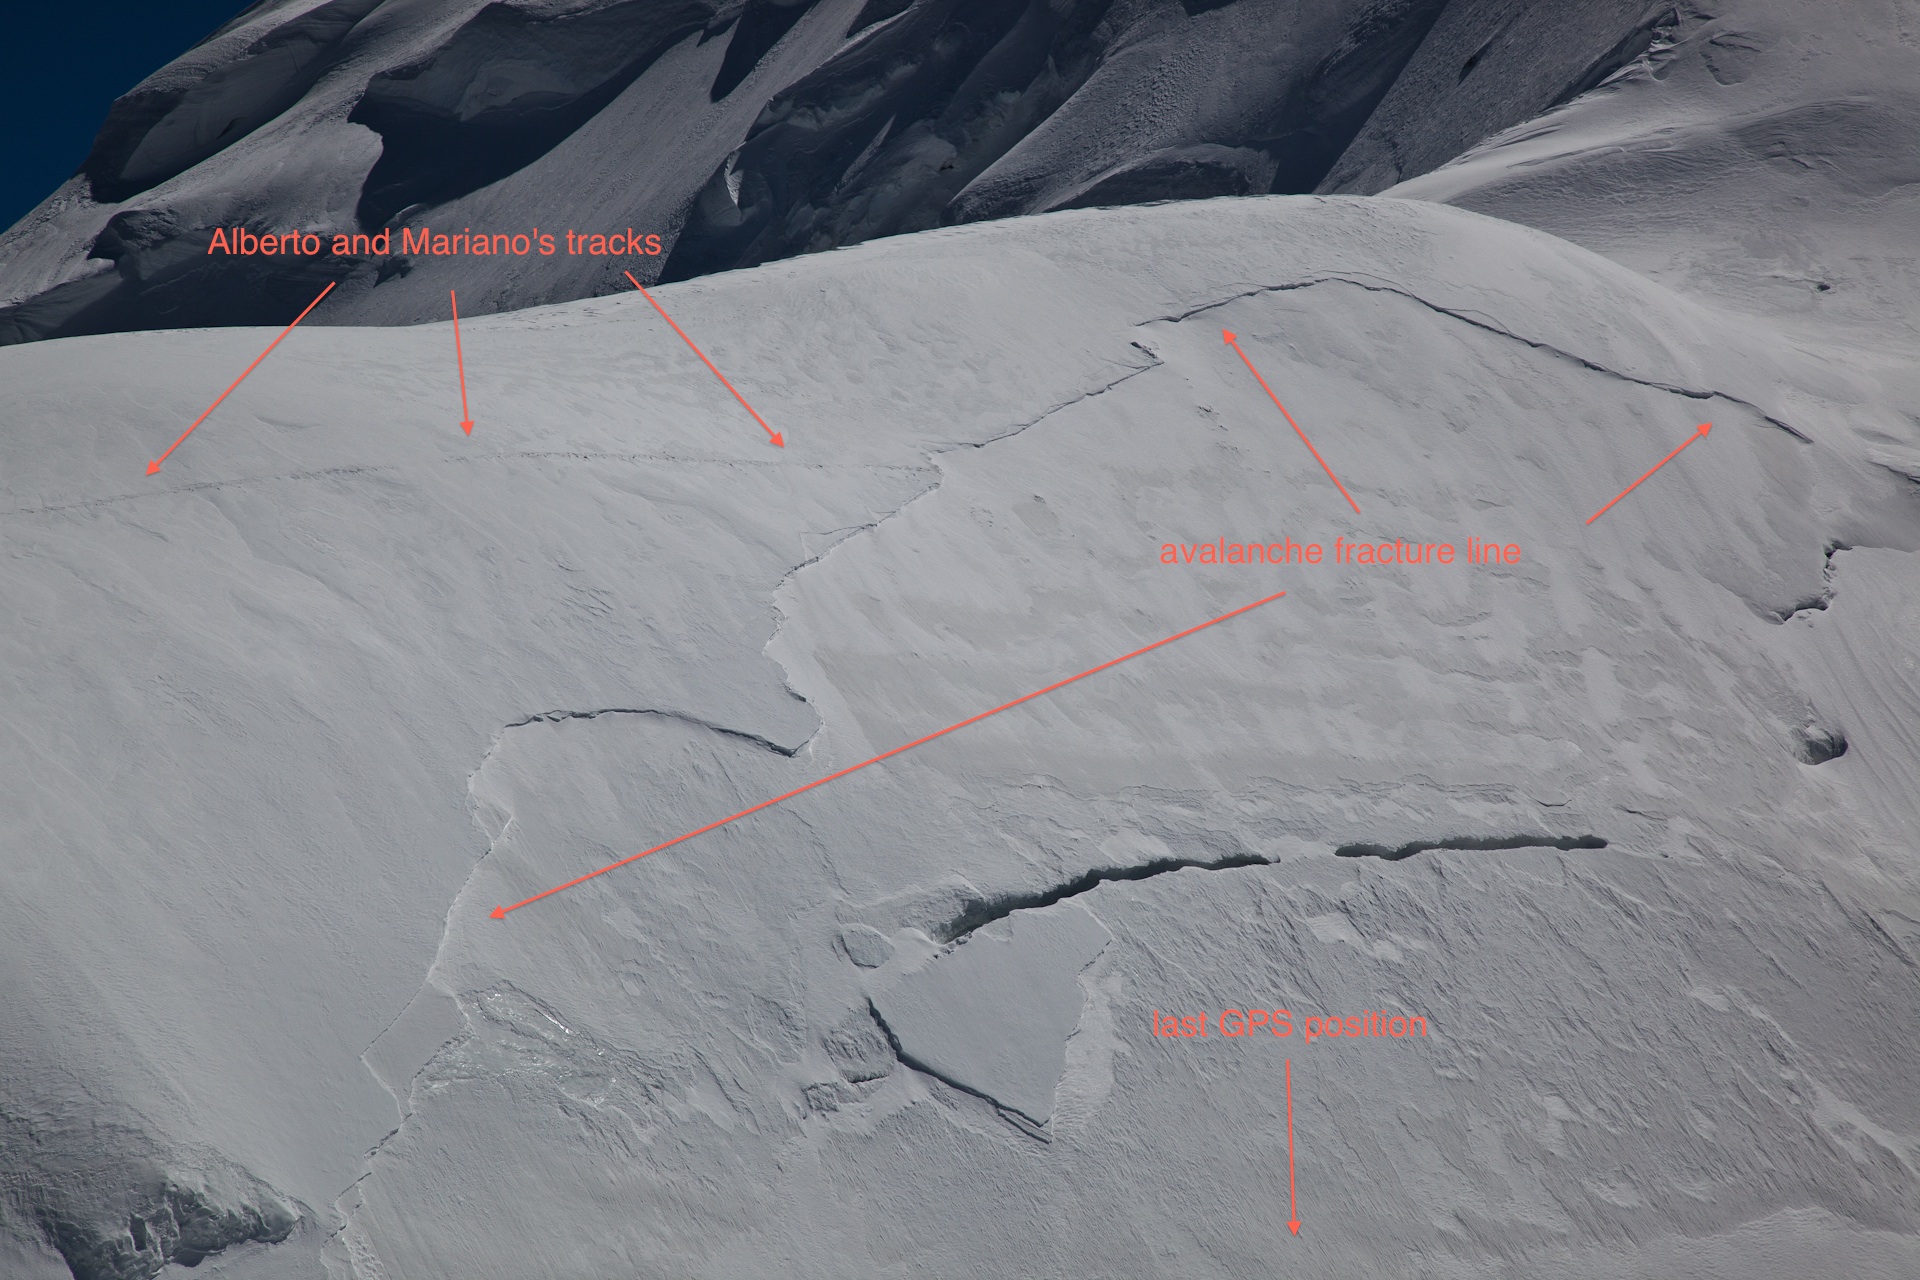 These photos were taken during the helicopter search and show the missing climbers' tracks disappearing into the crown line of a massive avalanche on Nanga Parbat's Mazeno Ridge. [Photo] Alex Gavan